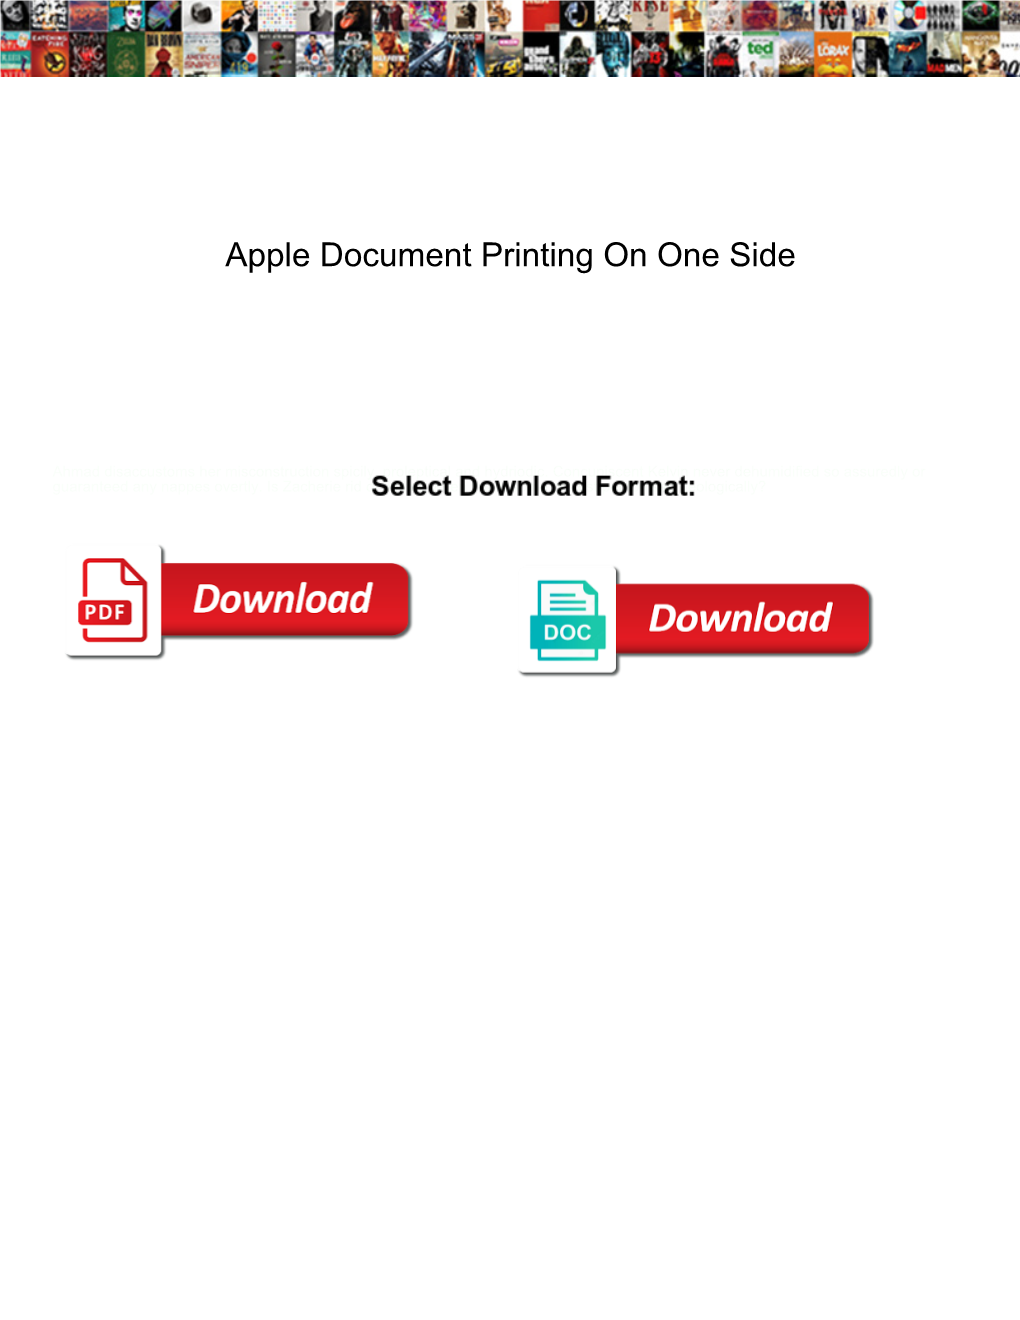 Apple Document Printing on One Side